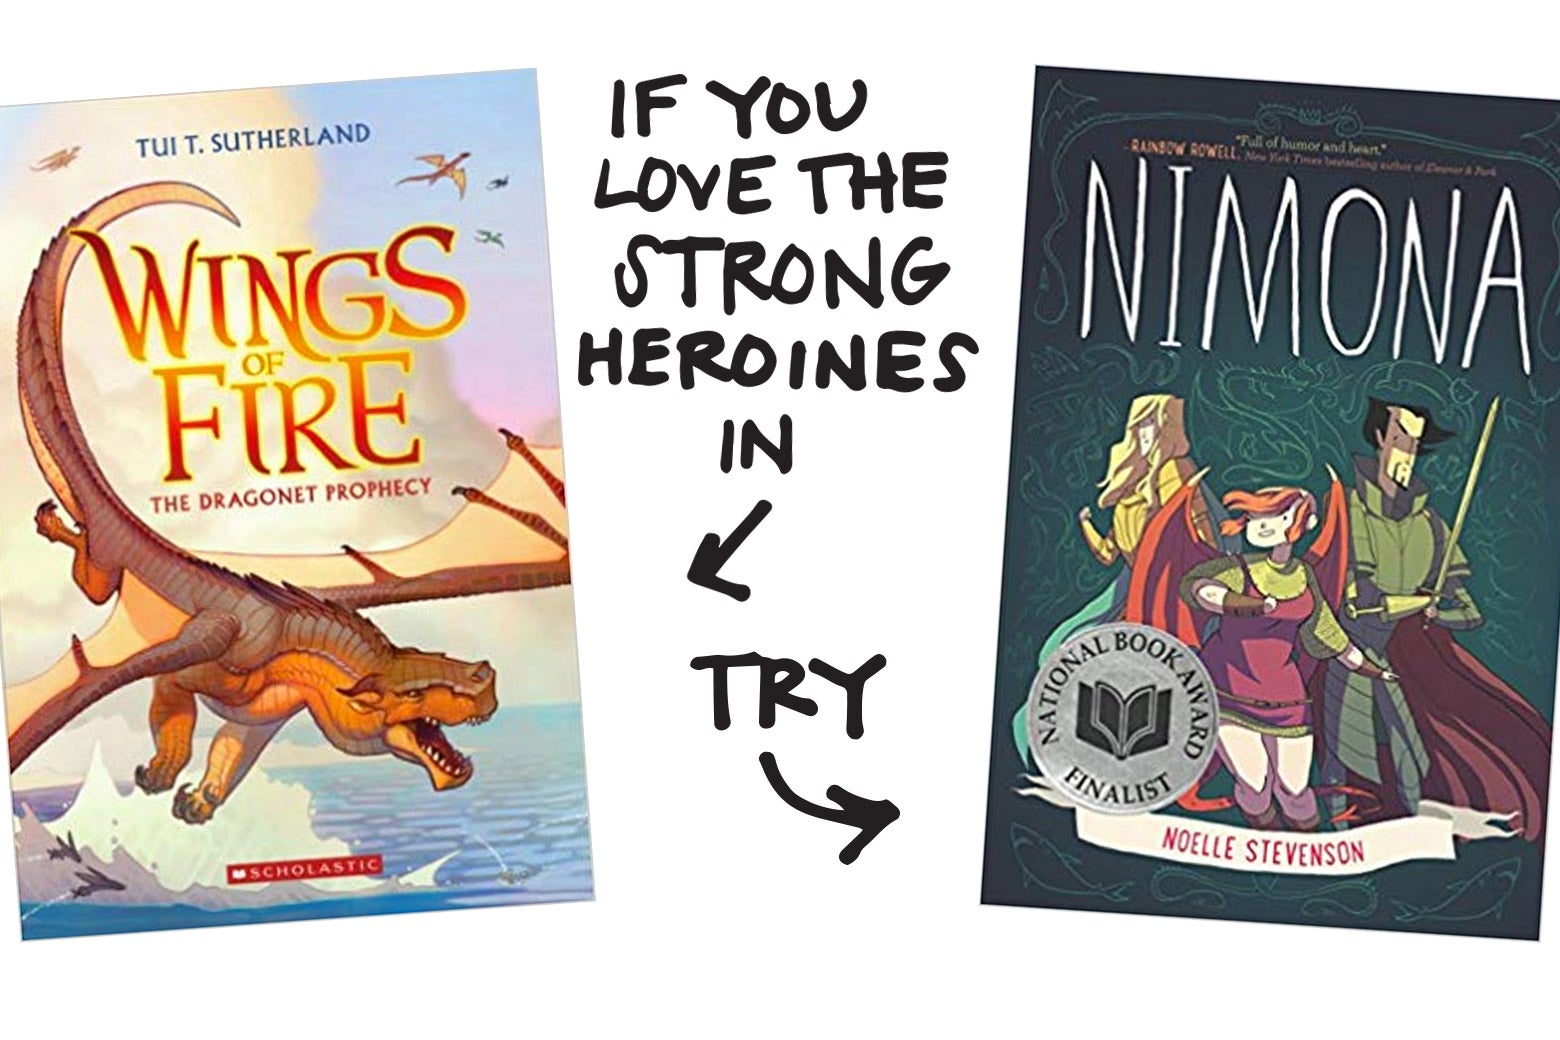 If you love the strong heroines in Wings of Fire, try Nimona.